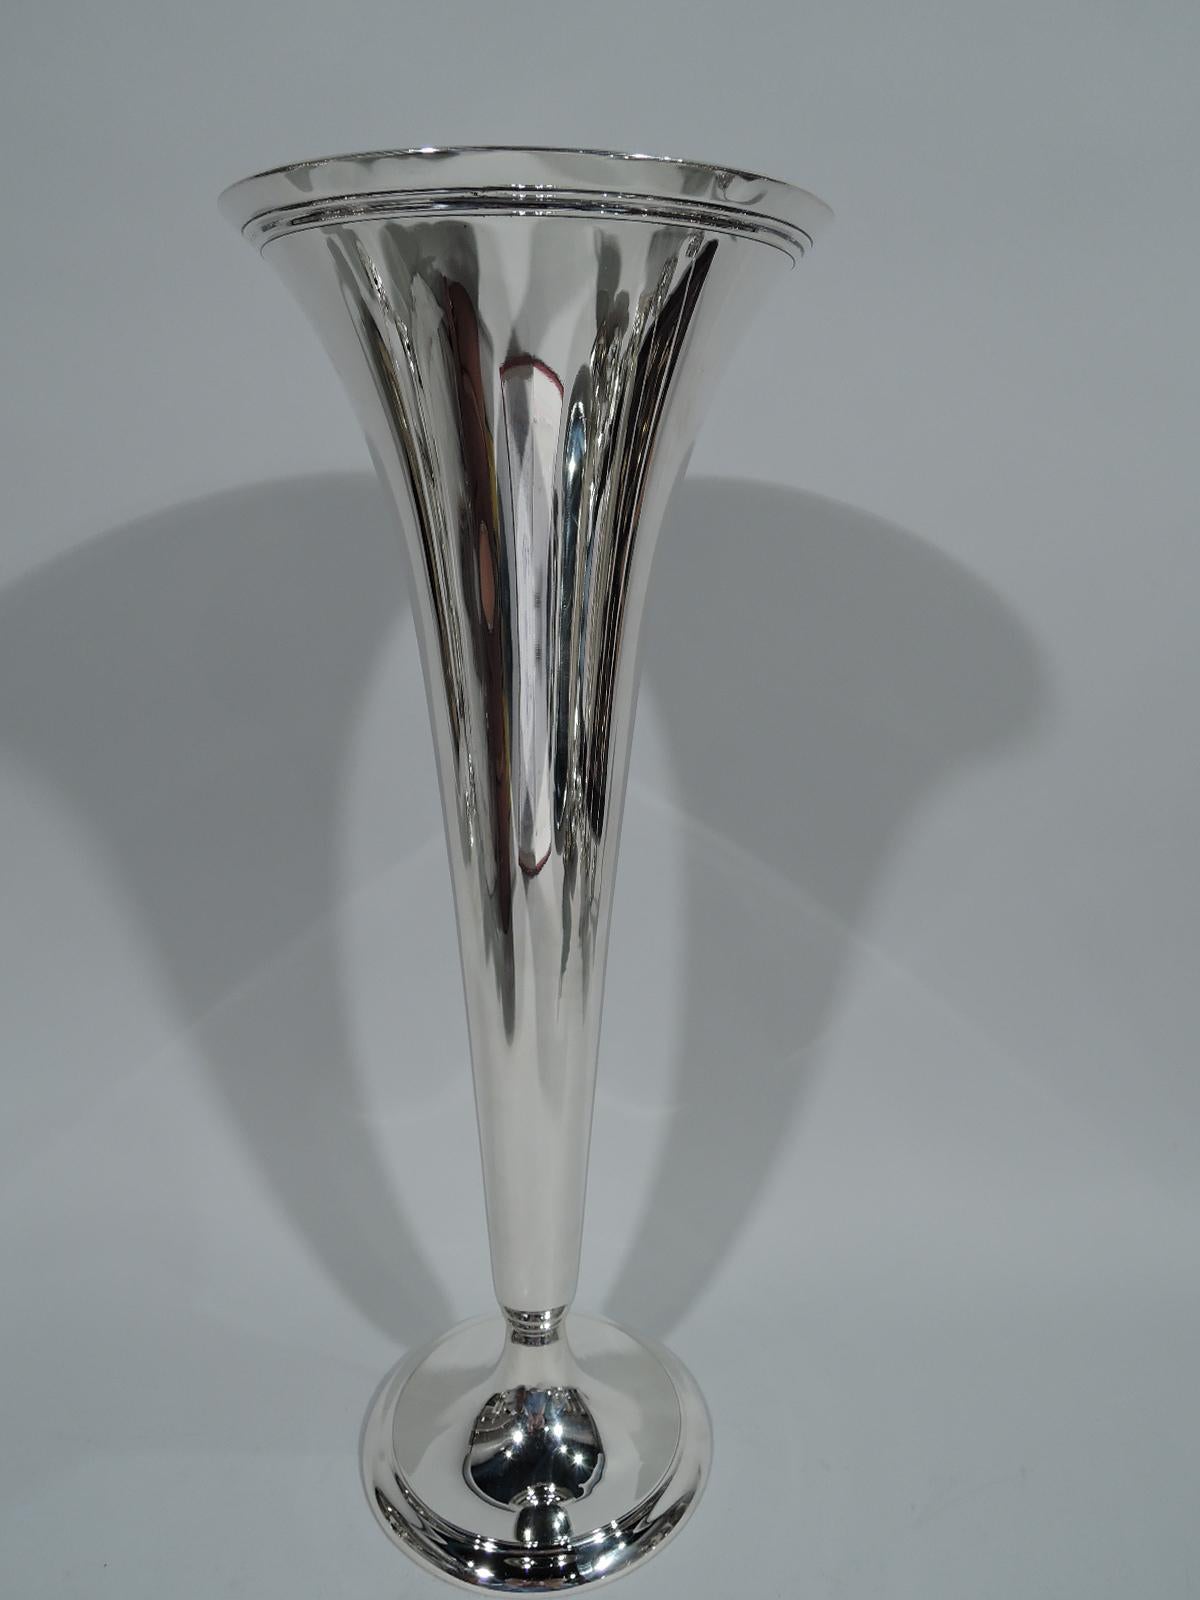 Striking Modern sterling silver trumpet vase. Made by Tiffany & Co. in New York. Cone mounted to stepped and raised foot. Ribbed rim band. Hallmark includes pattern no. 18594 (first produced in 1913) and director’s letter m (1907-47). Weight: 19